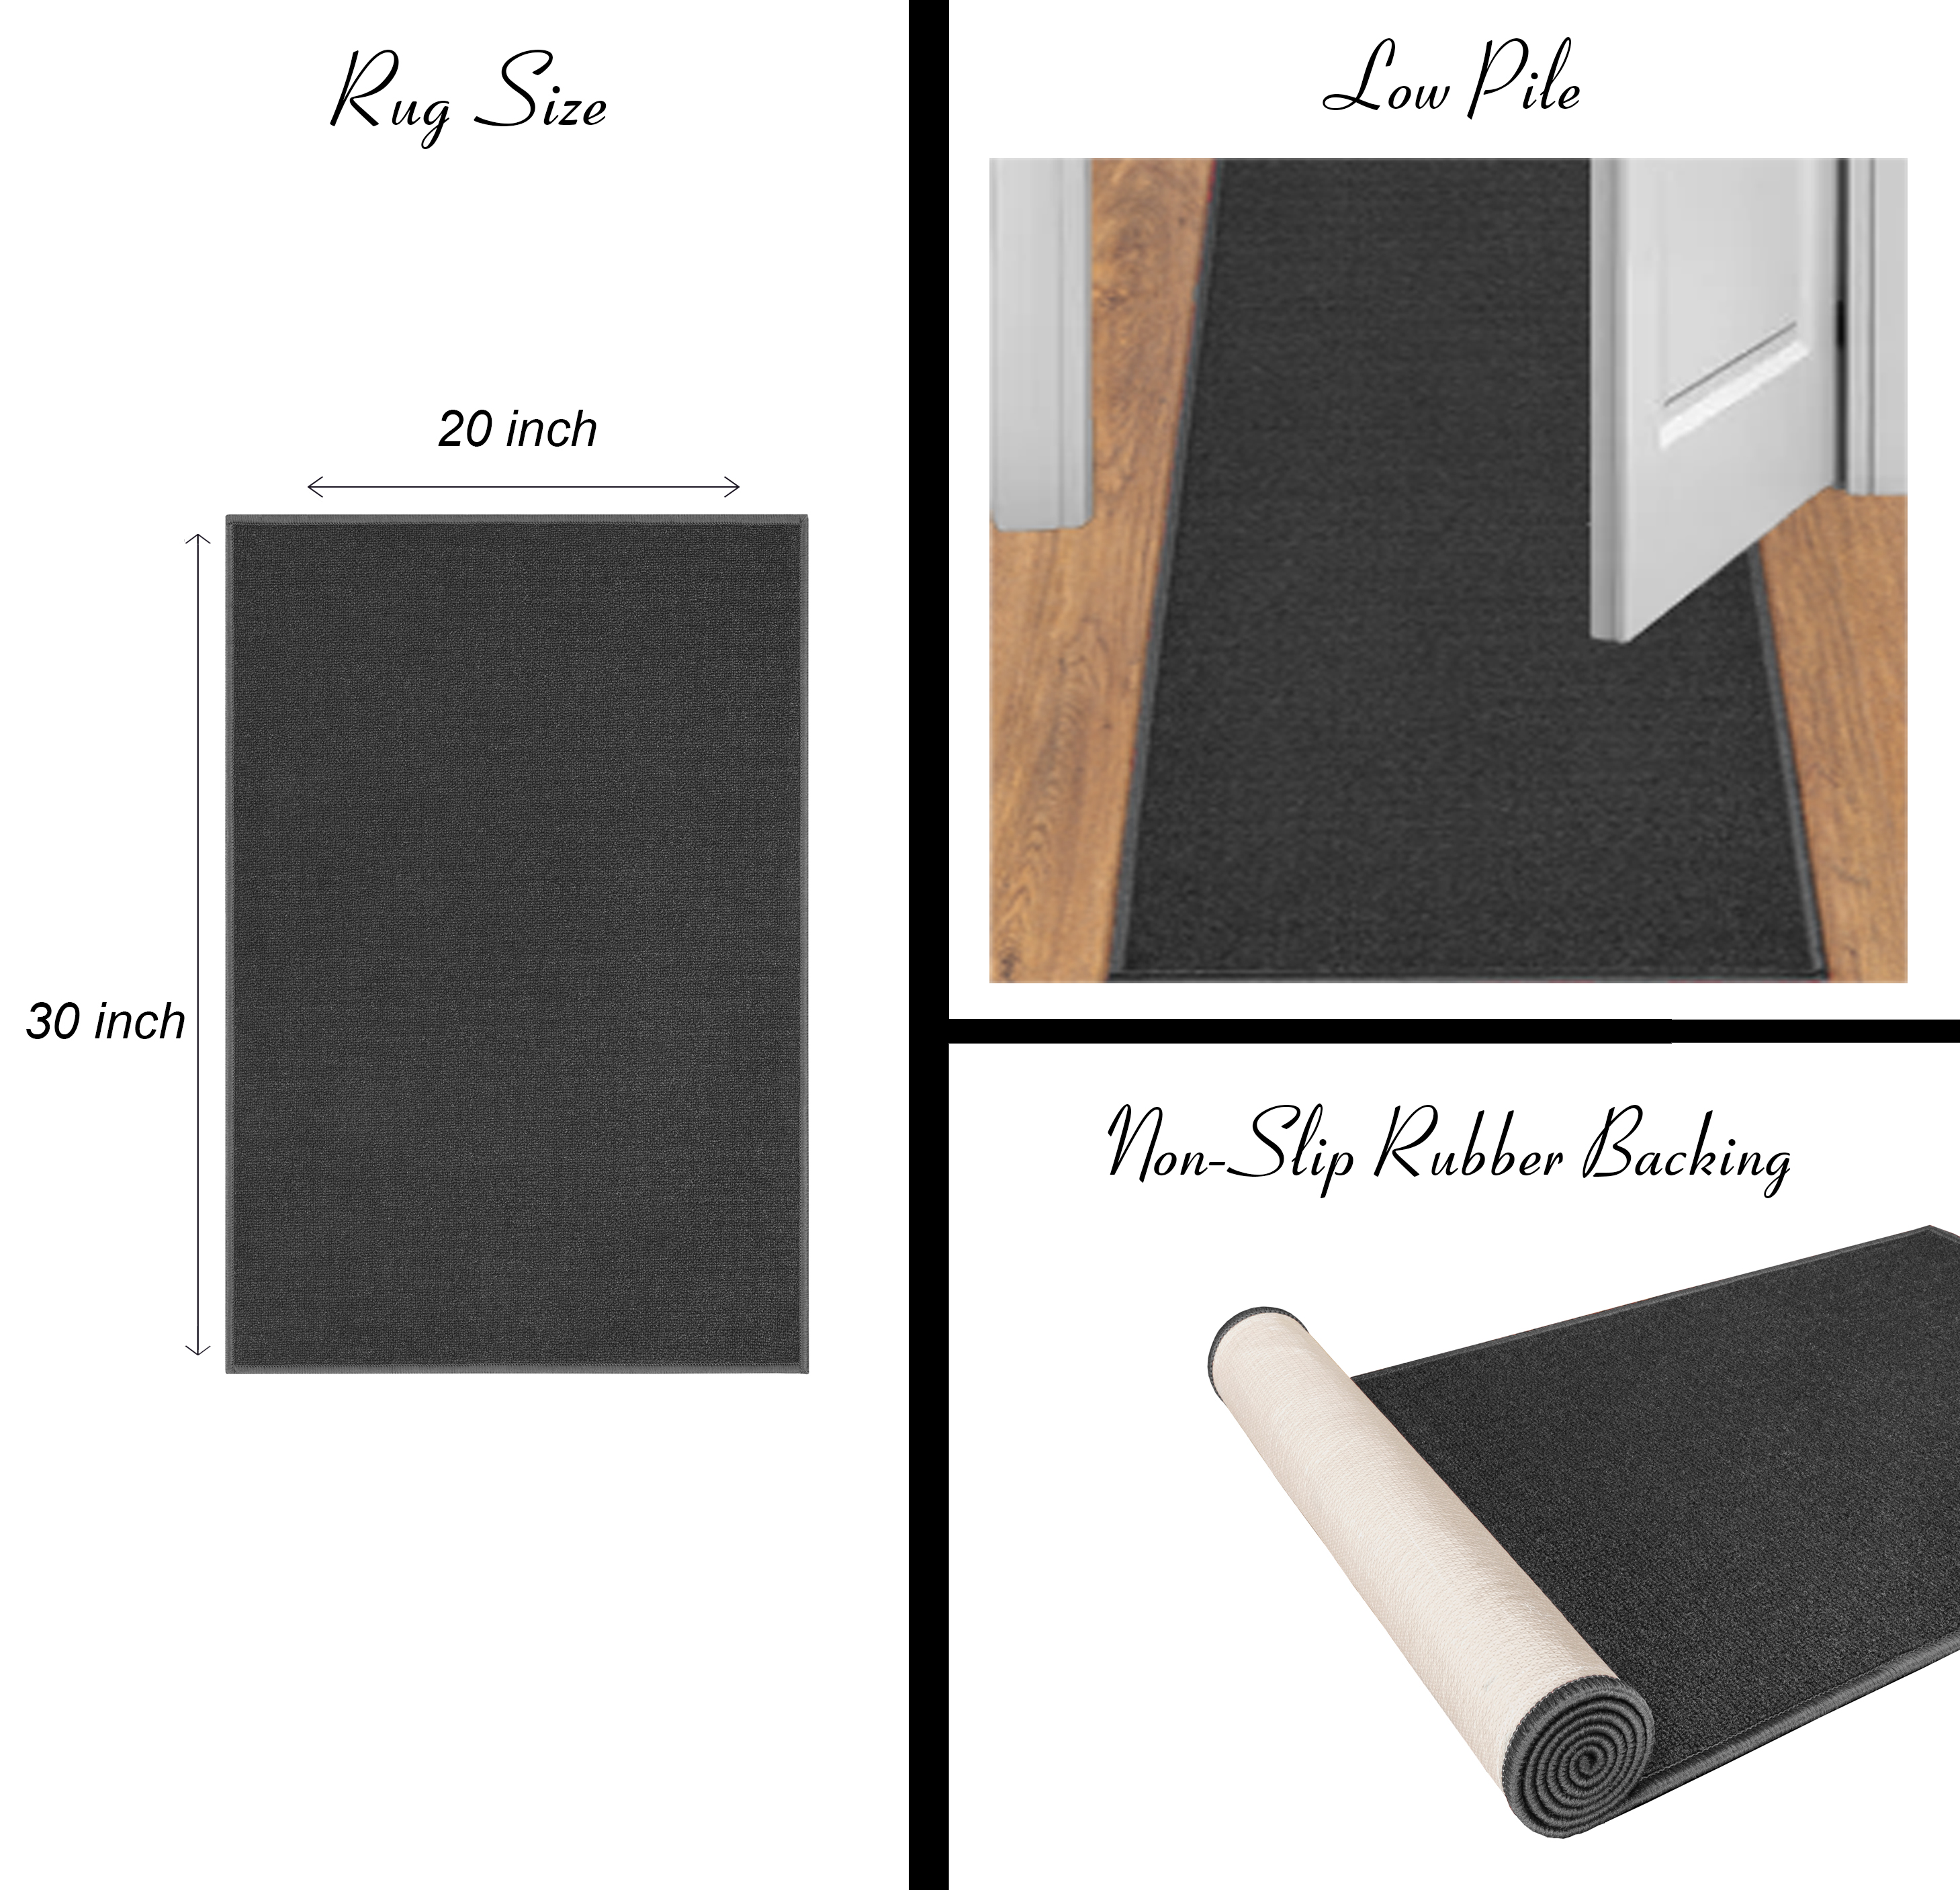 Ottomanson Machine Washable Non-Slip Rubberback 2x3 Sweet Home Doormat for Entryway, 20" x 30", Gray - image 3 of 4